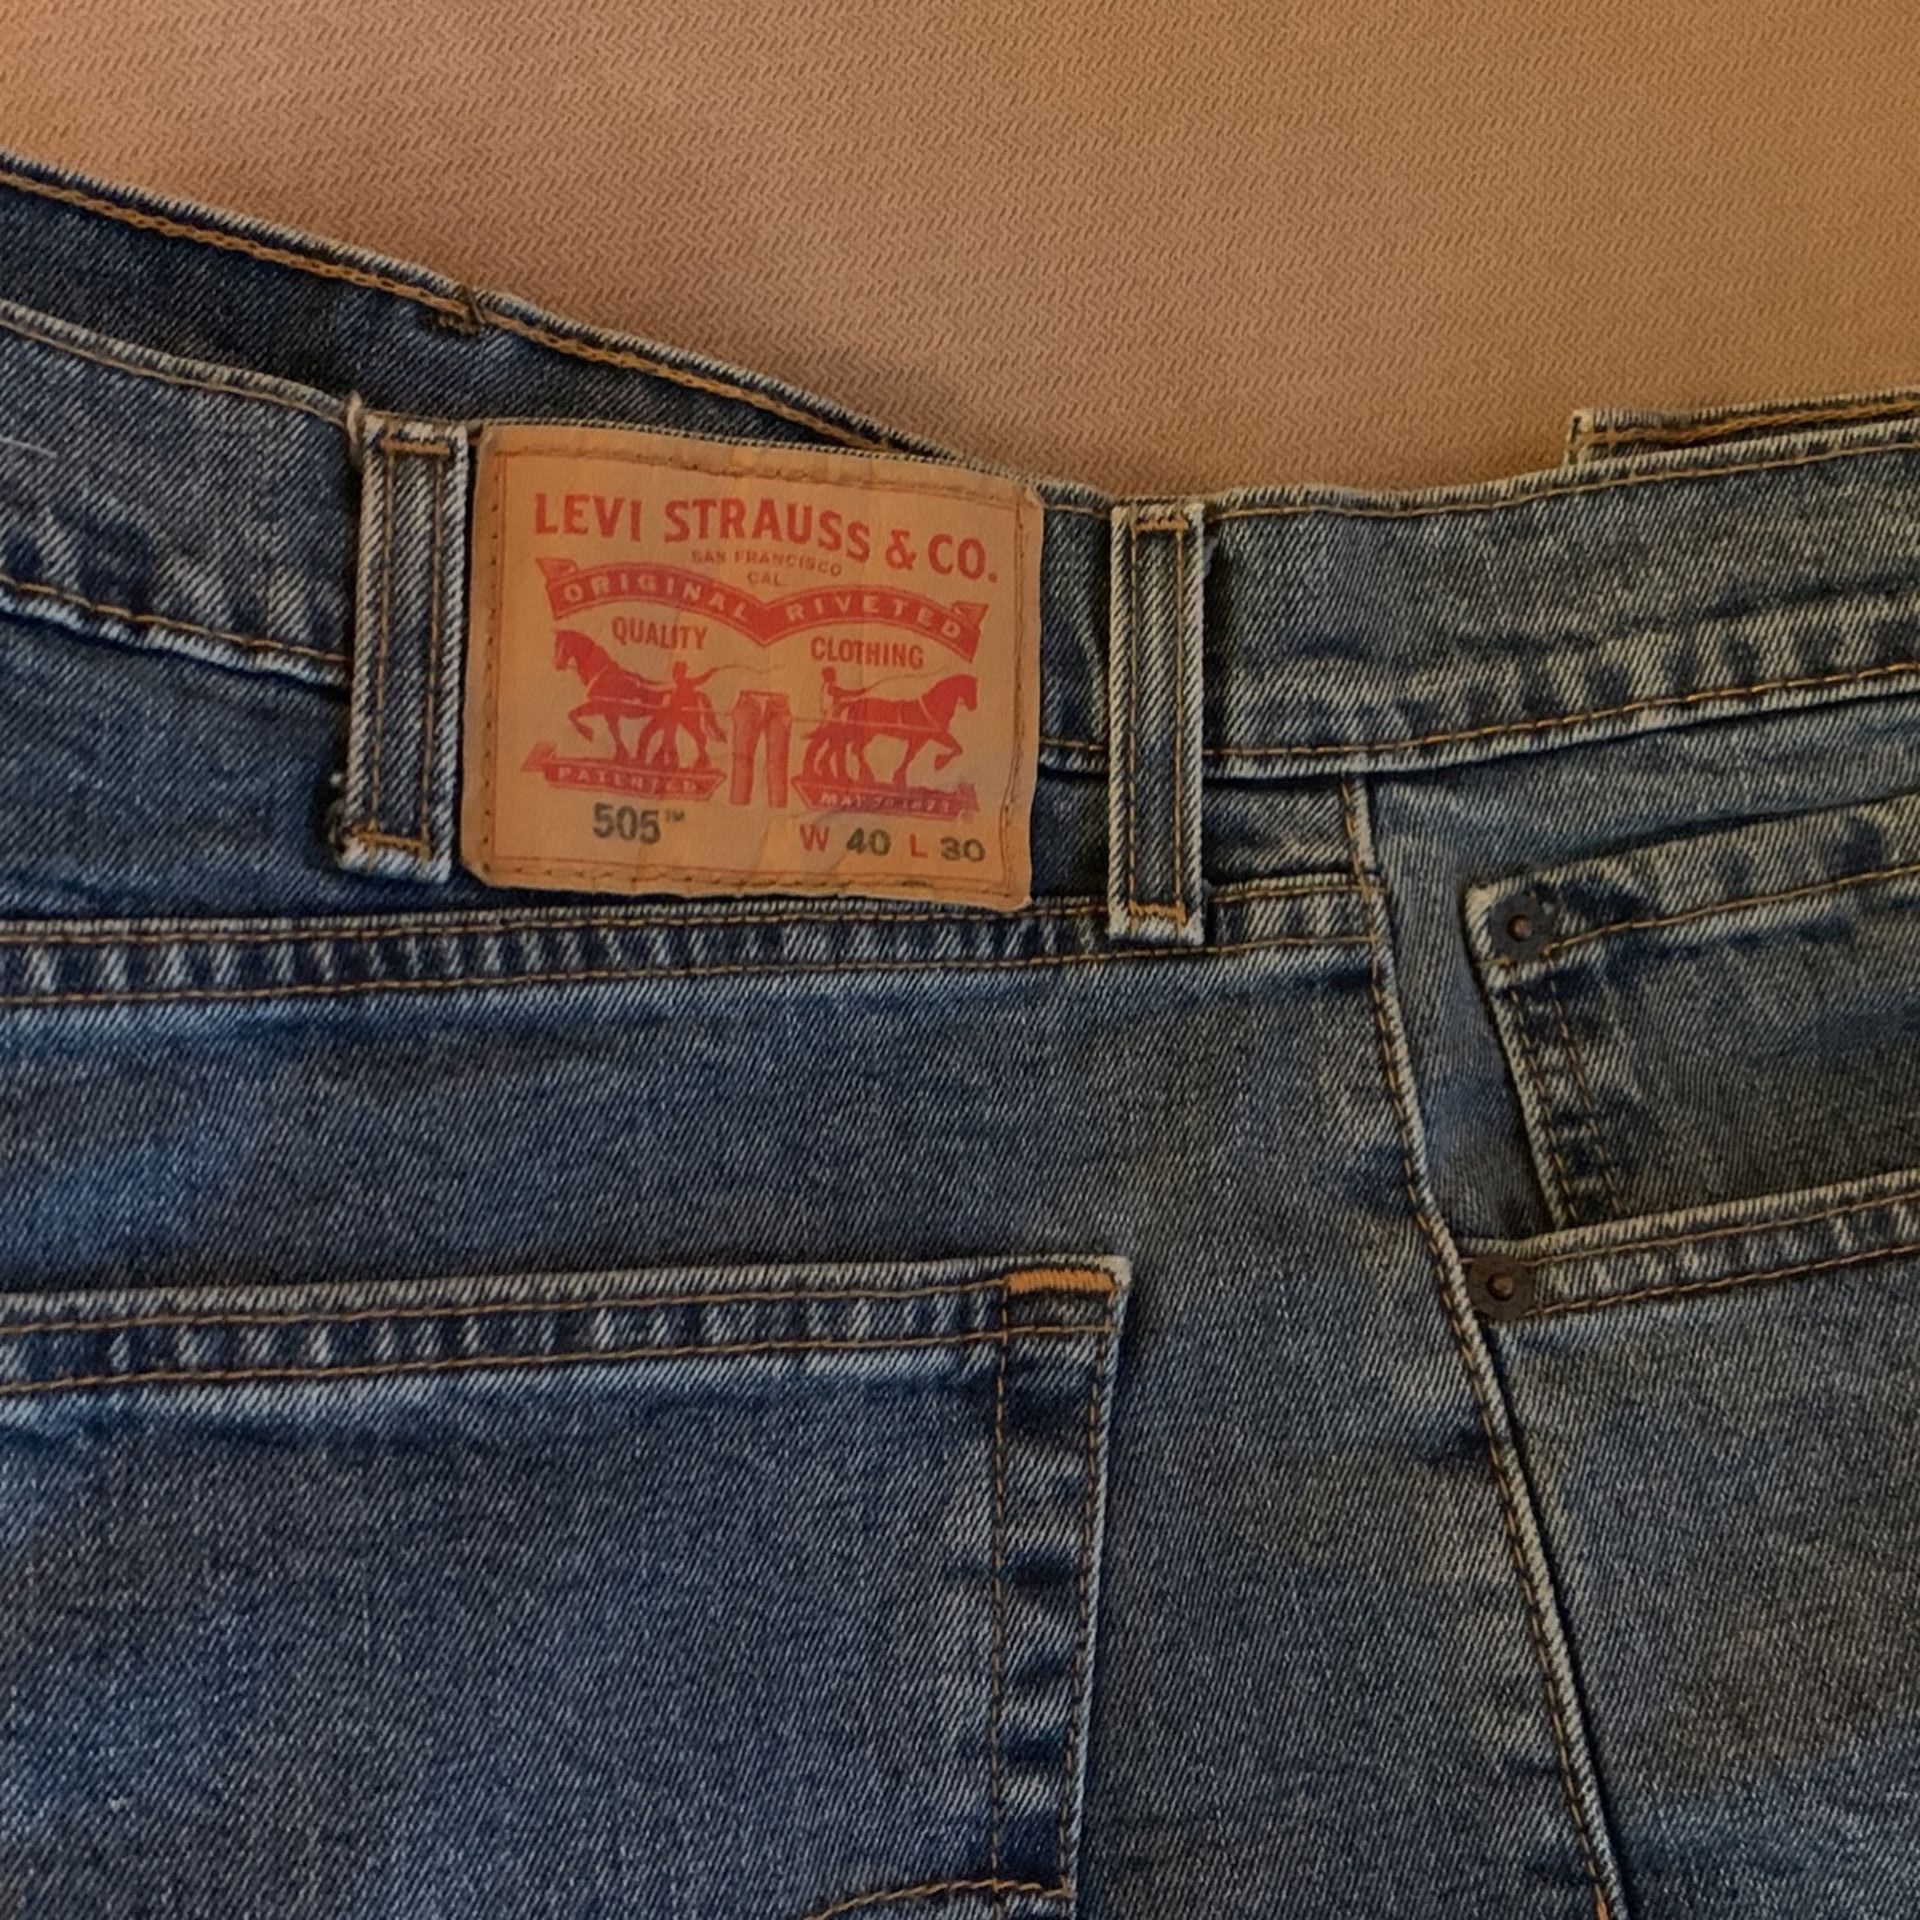 LEVI 505 REGULAR FIT MENS JEANS 40 X 30 Brand NEW - Macy's $69 for Sale in  Santa Monica, CA - OfferUp